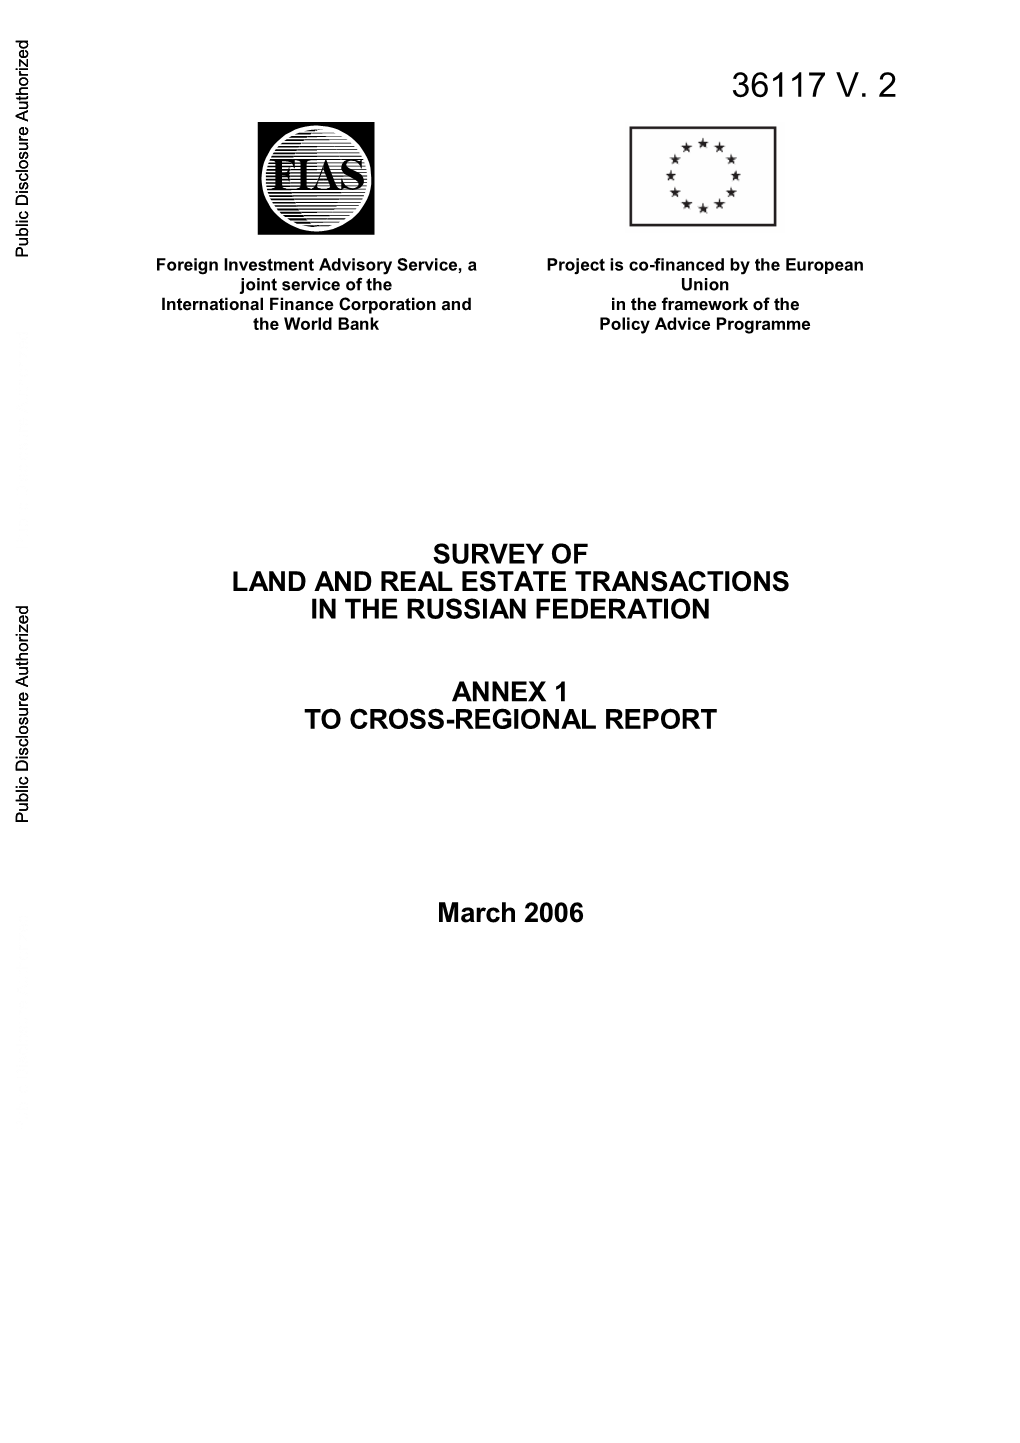 SURVEY of LAND and REAL ESTATE TRANSACTIONS in the RUSSIAN FEDERATION ANNEX 1 to CROSS-REGIONAL REPORT March 2006